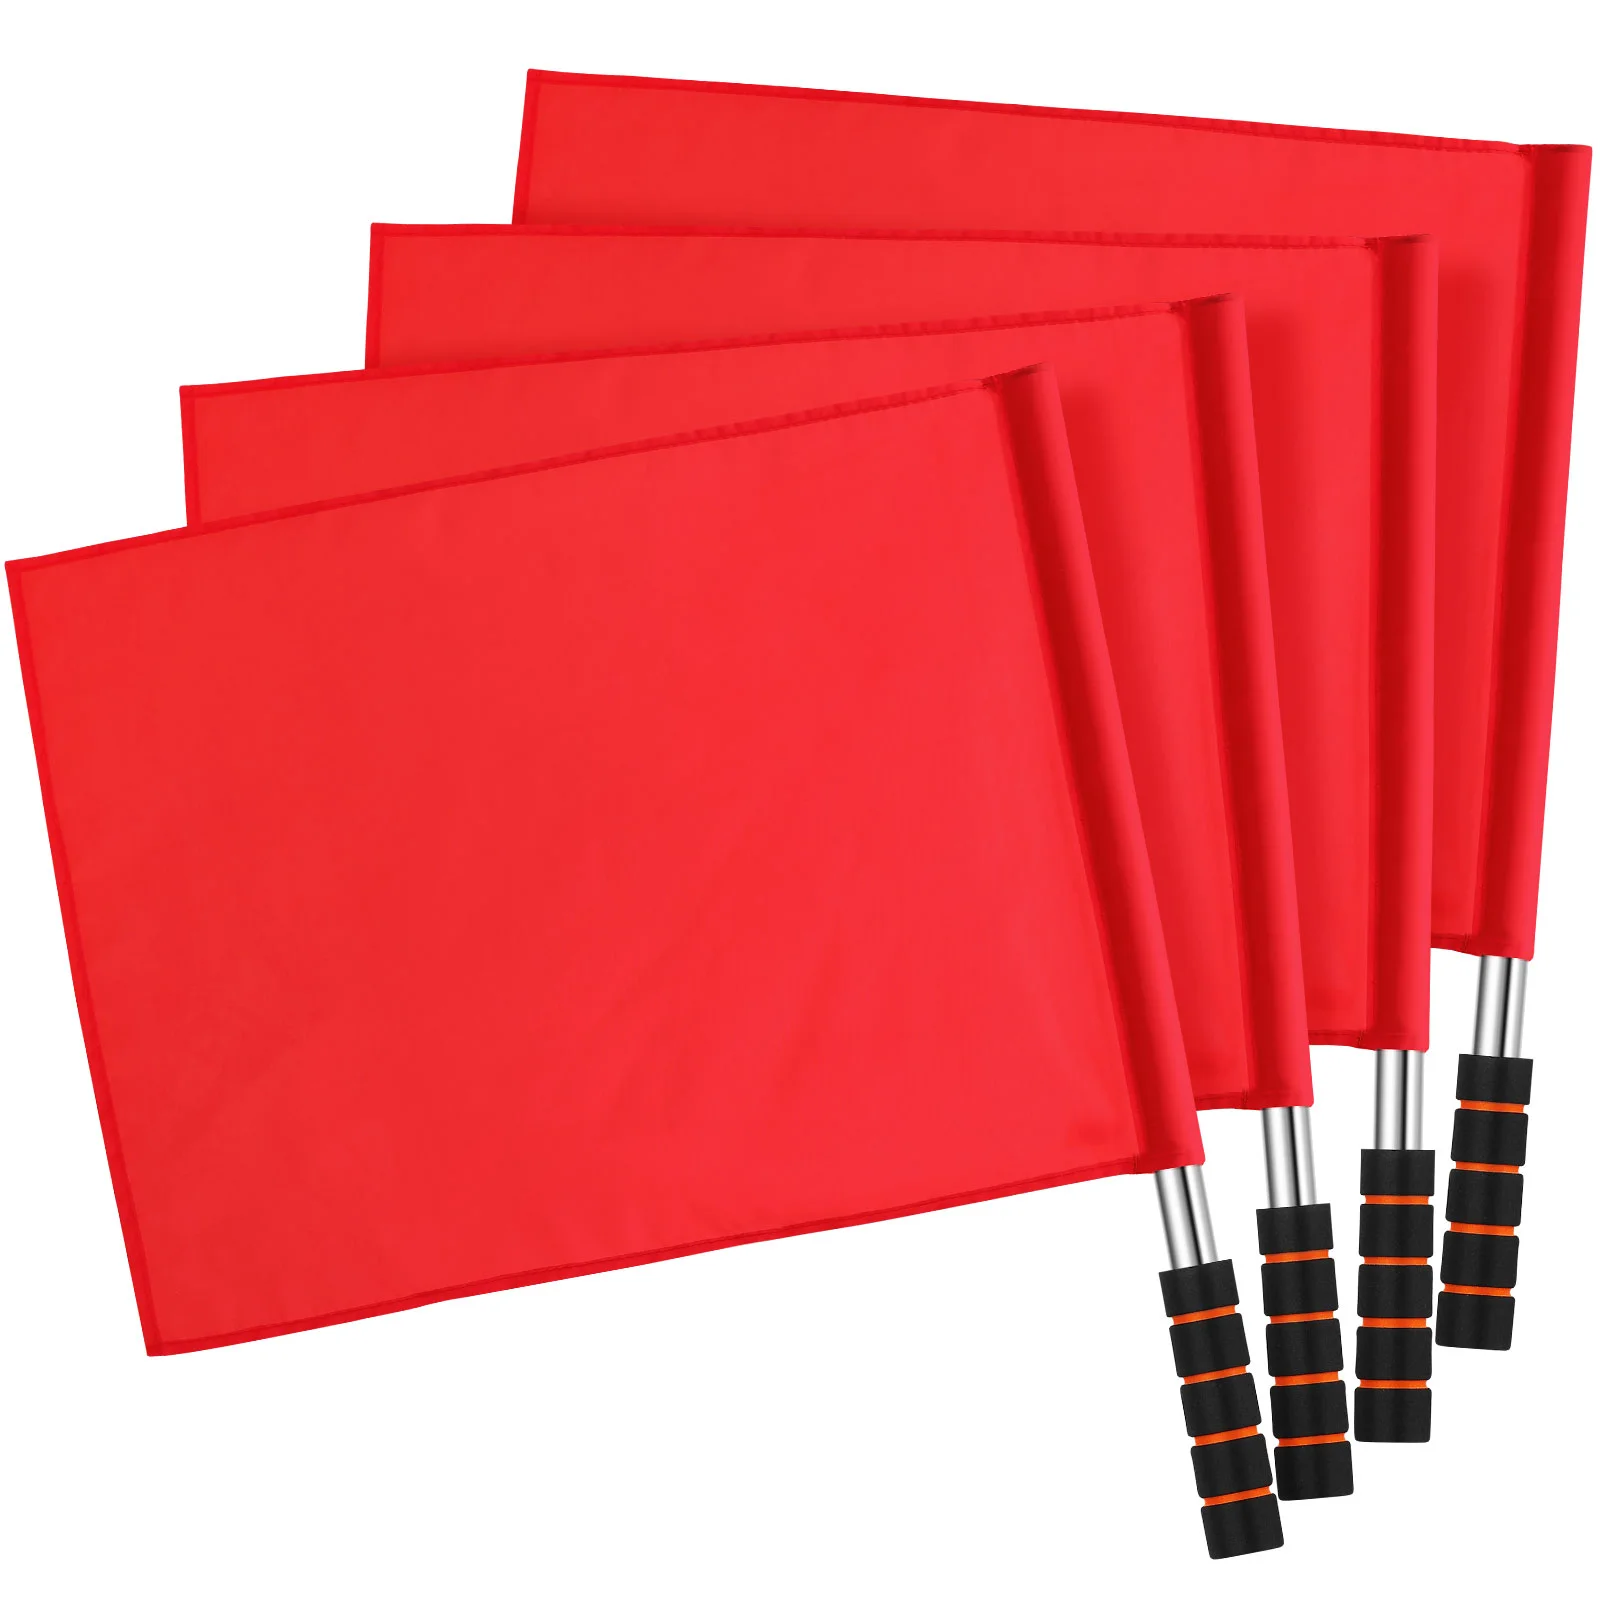 

Referee Flags Hand Waving Referee Traffic Flags For Game Play Practical Sports Training Match Competition Survival